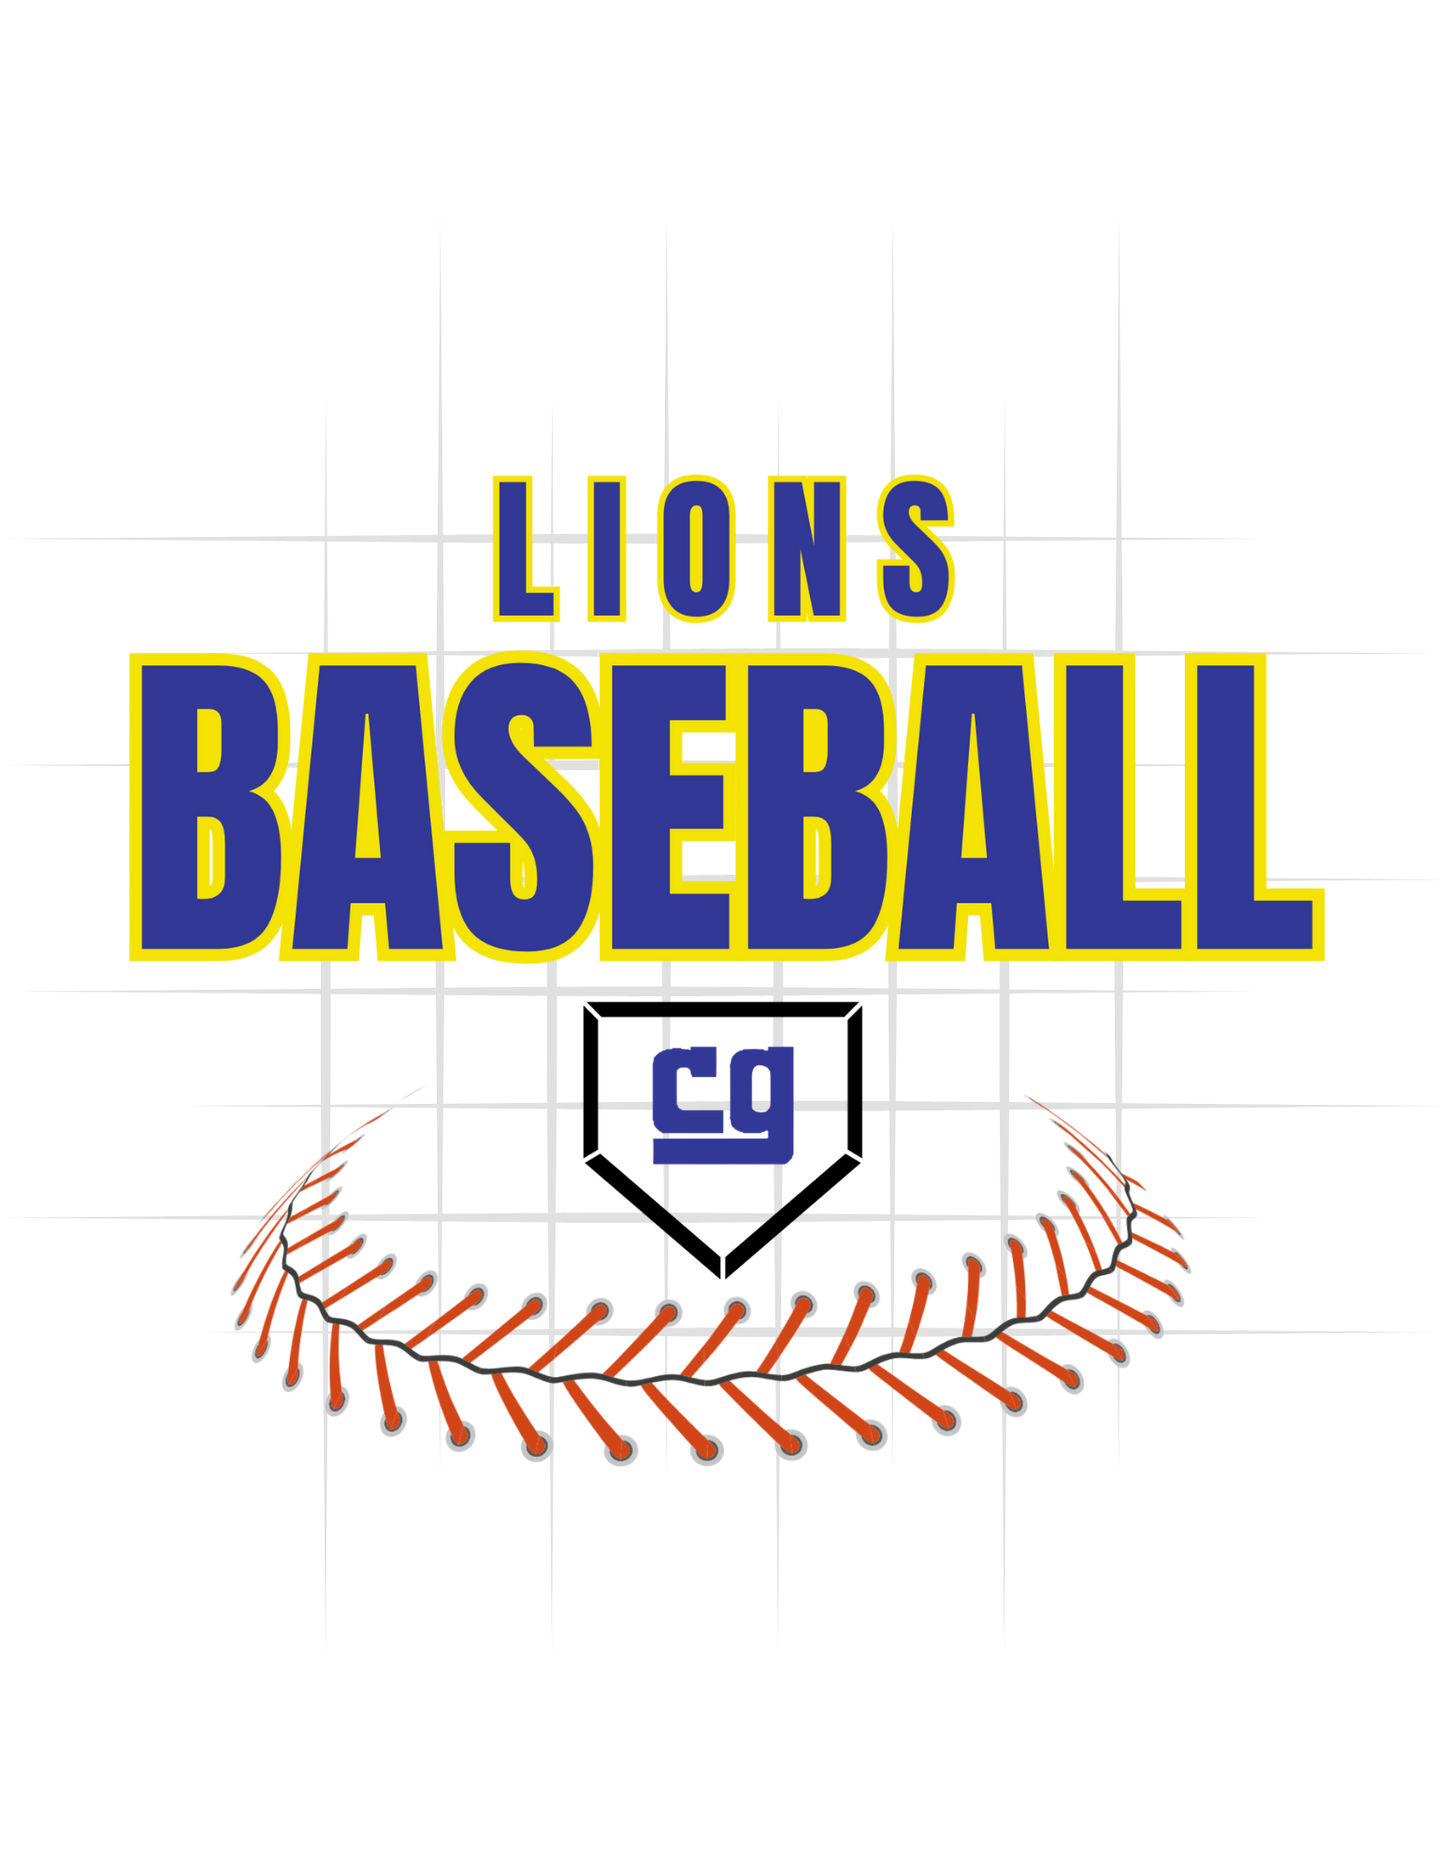 Lions Baseball Curved Laces Tee